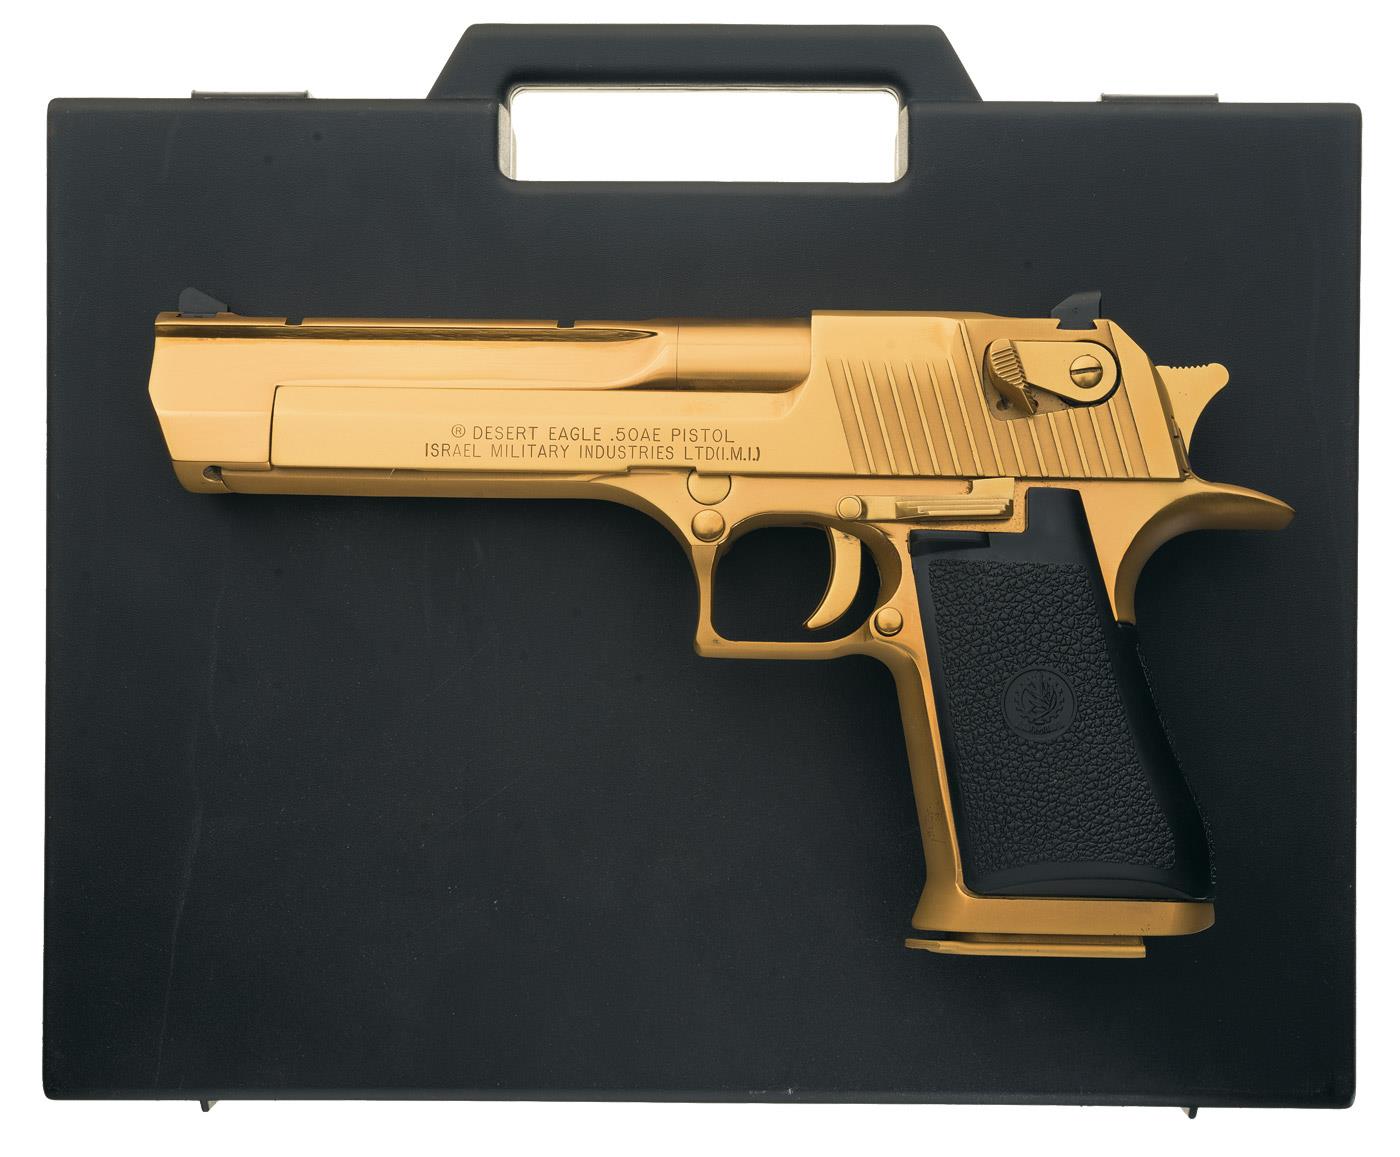 We Tech Desert Eagle 50 Ae Full Metal Gas Blowback Airsoft Pistol By Cyberg...